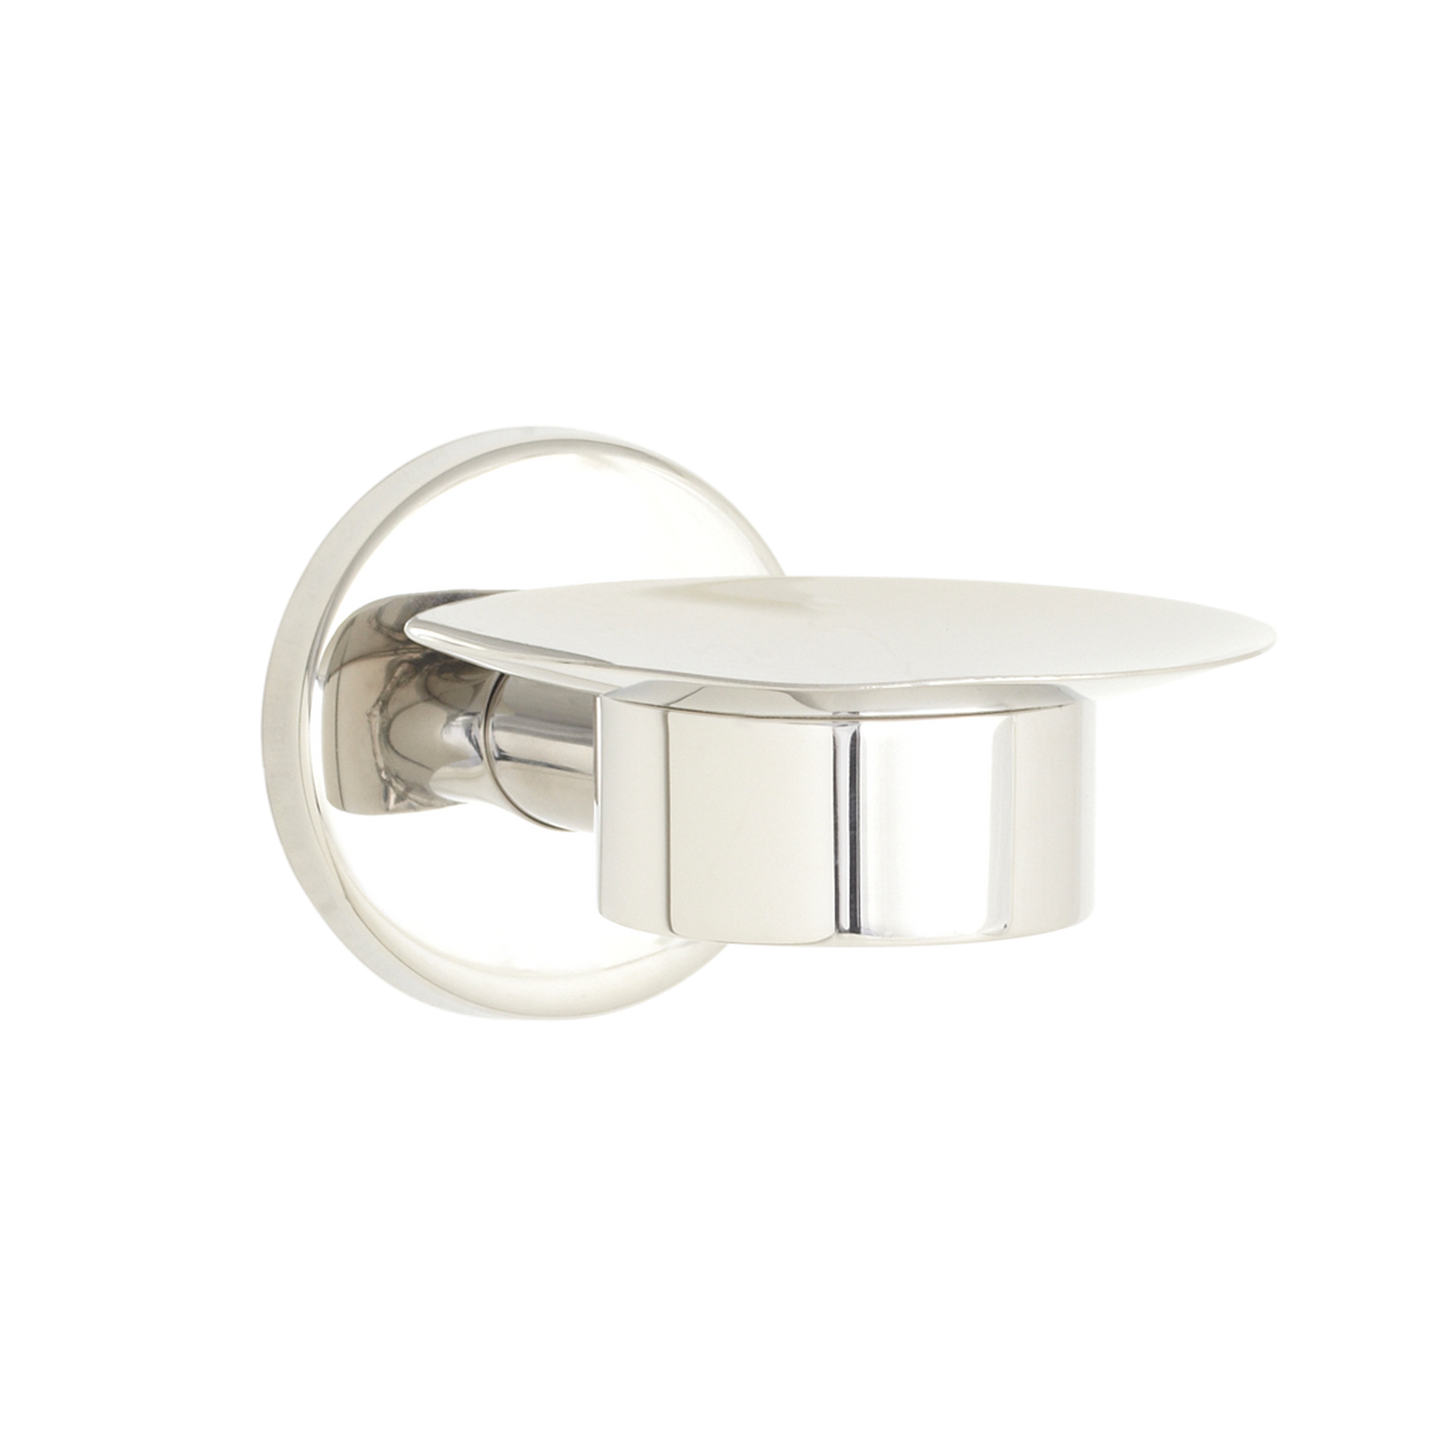 Seachrome 700 Conorado Series 5" W x 3" H Satin Stainless Steel Soap Holder Without Holes